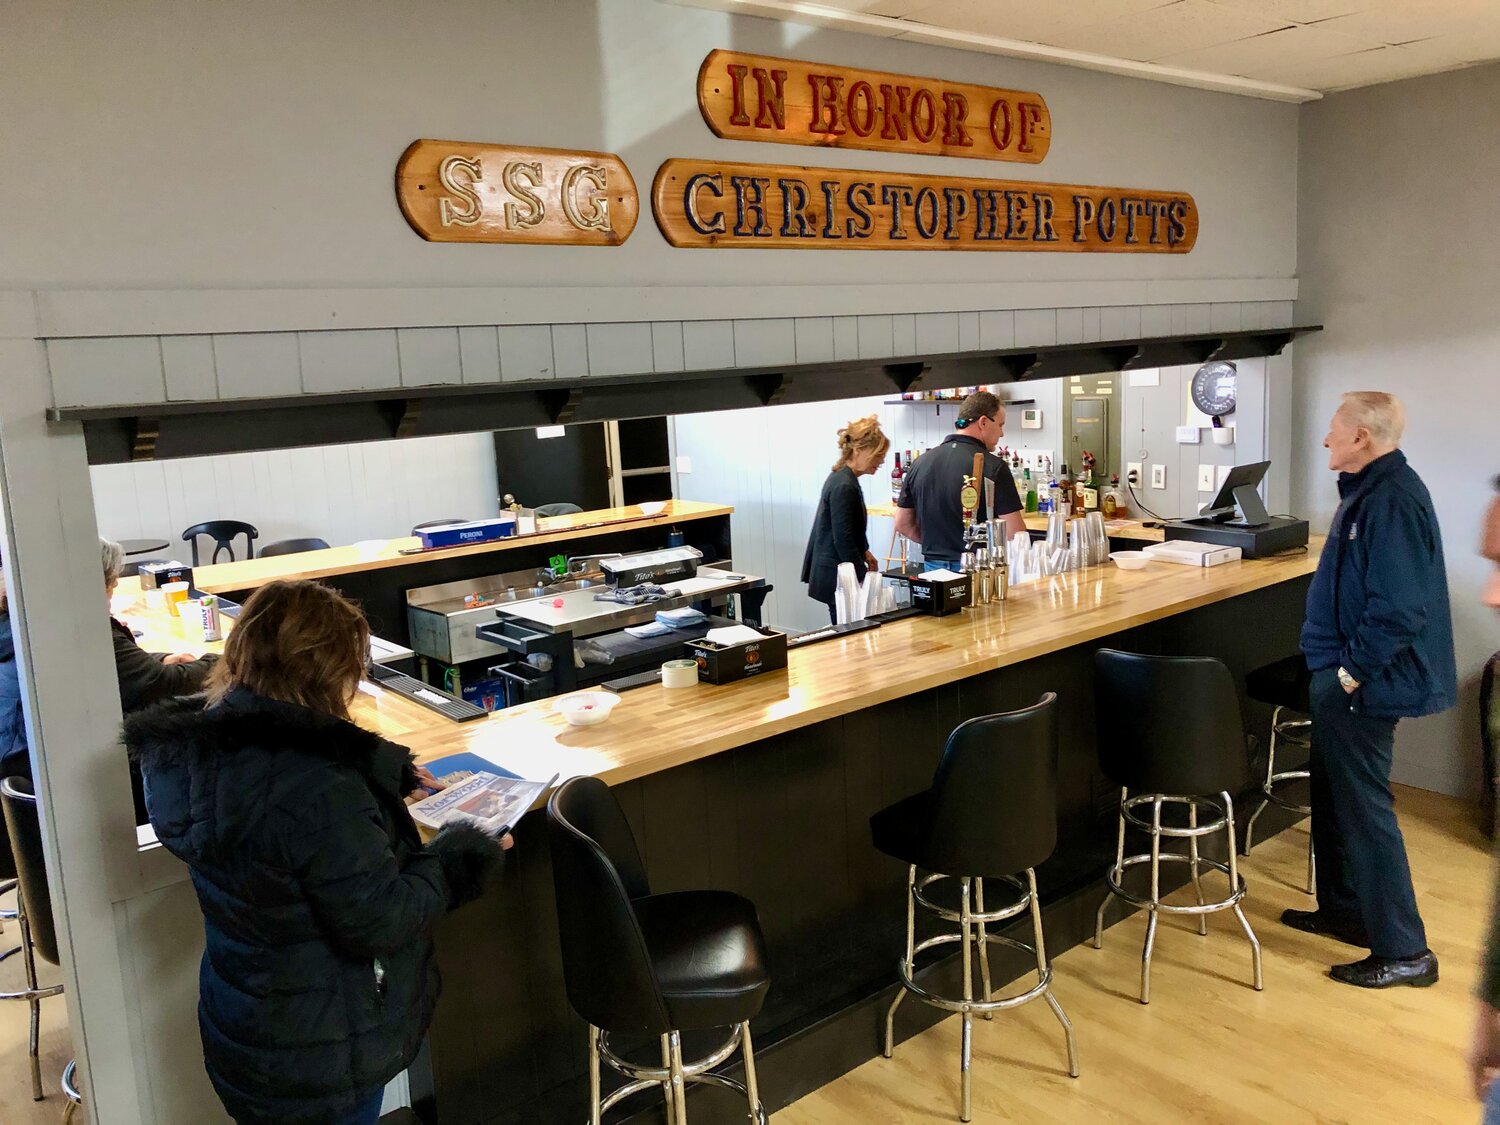 Saturday was the grand opening of the new canteen in honor of Staff Sgt. Christopher Potts of Tiverton, who was killed in Iraq in 2004 as his unit was conducting traffic control operations and enemy forces attacked them using small arms fire. He was 38.